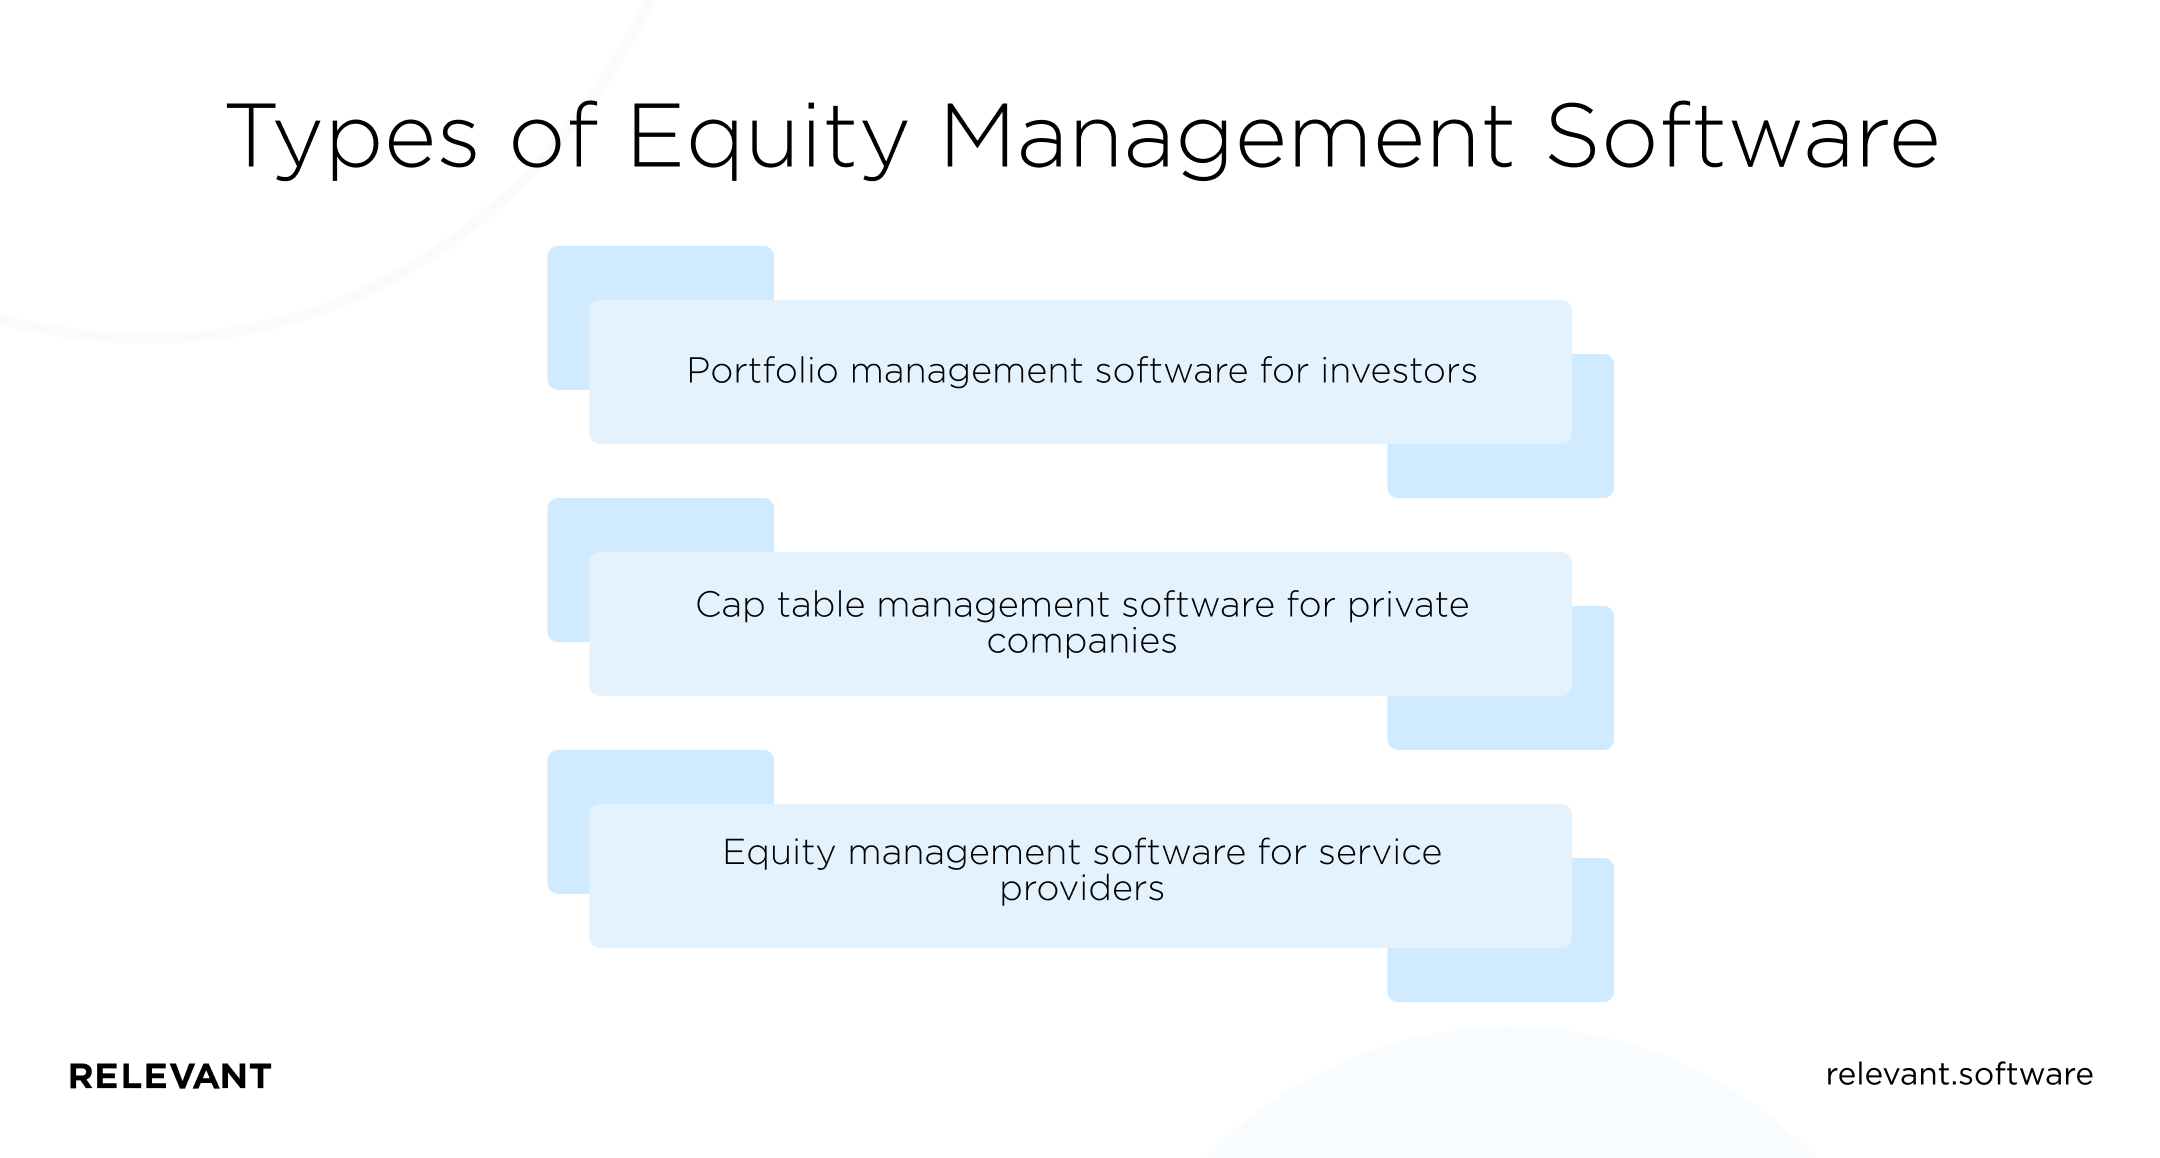 Types of Equity Management Software